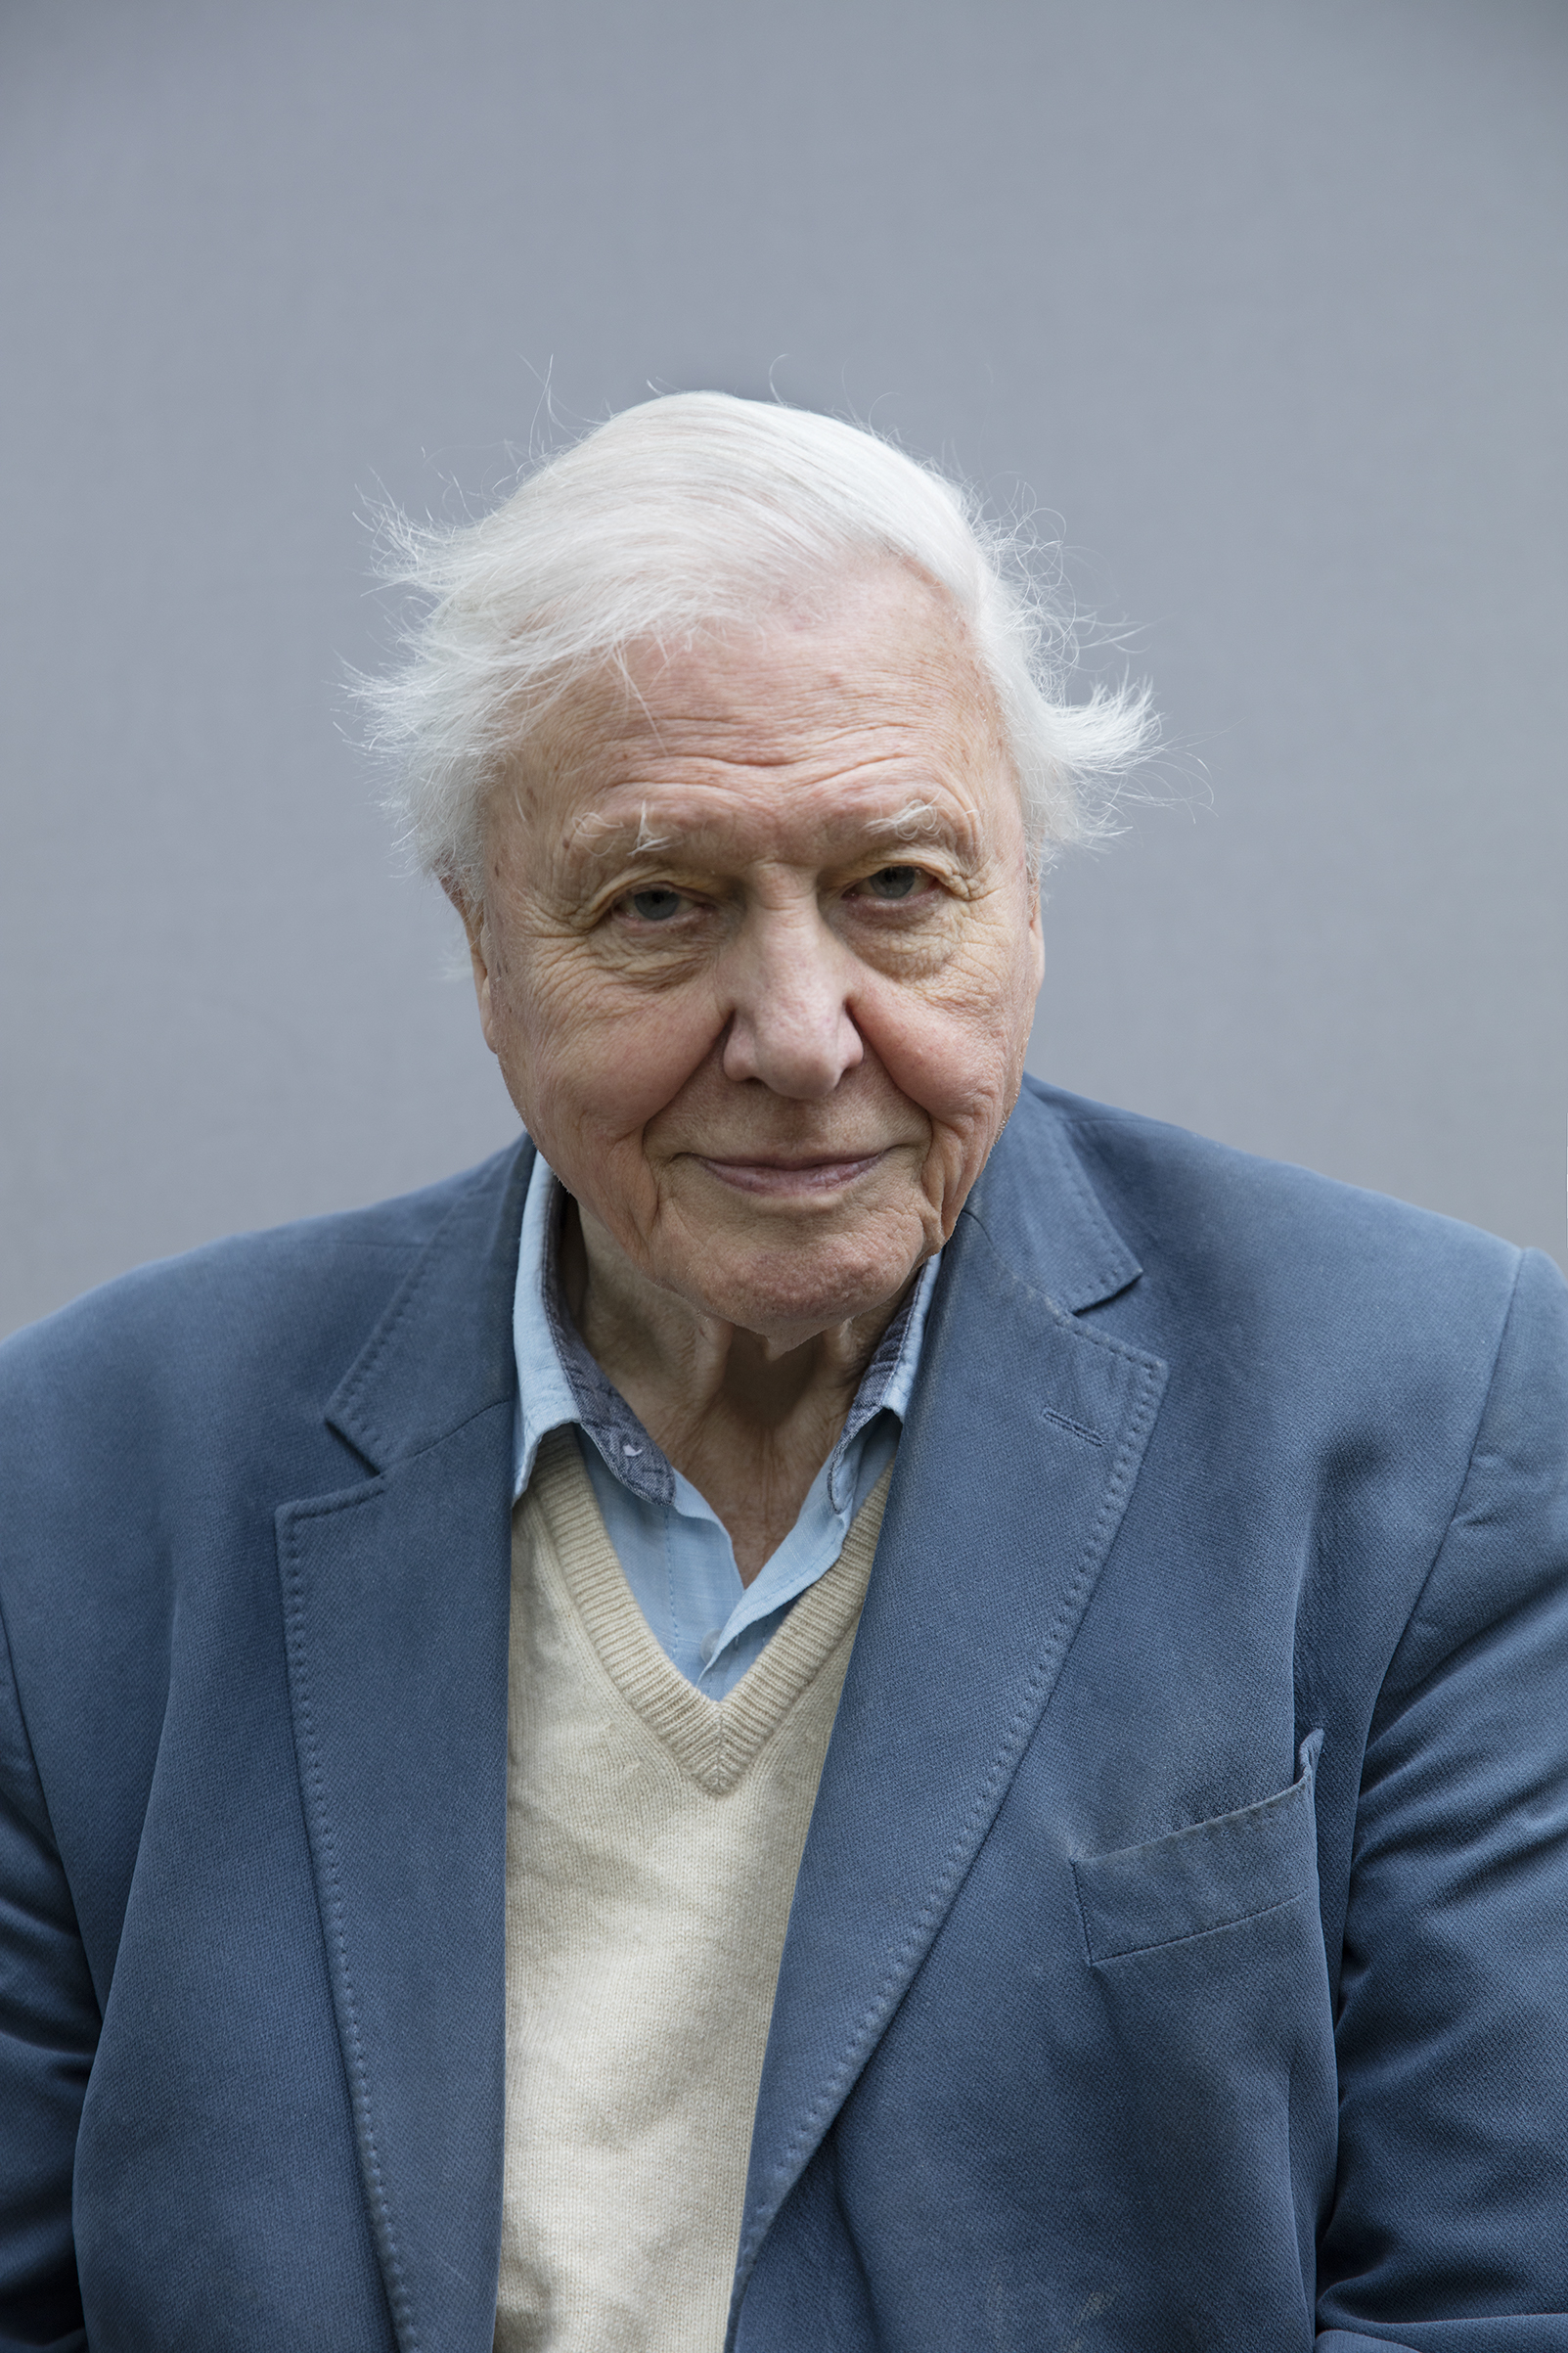 Sir David Attenborough poses for a portrait at the Royal Botanic Gardens, Kew, London, in February. (Jackie Nickerson for TIME)